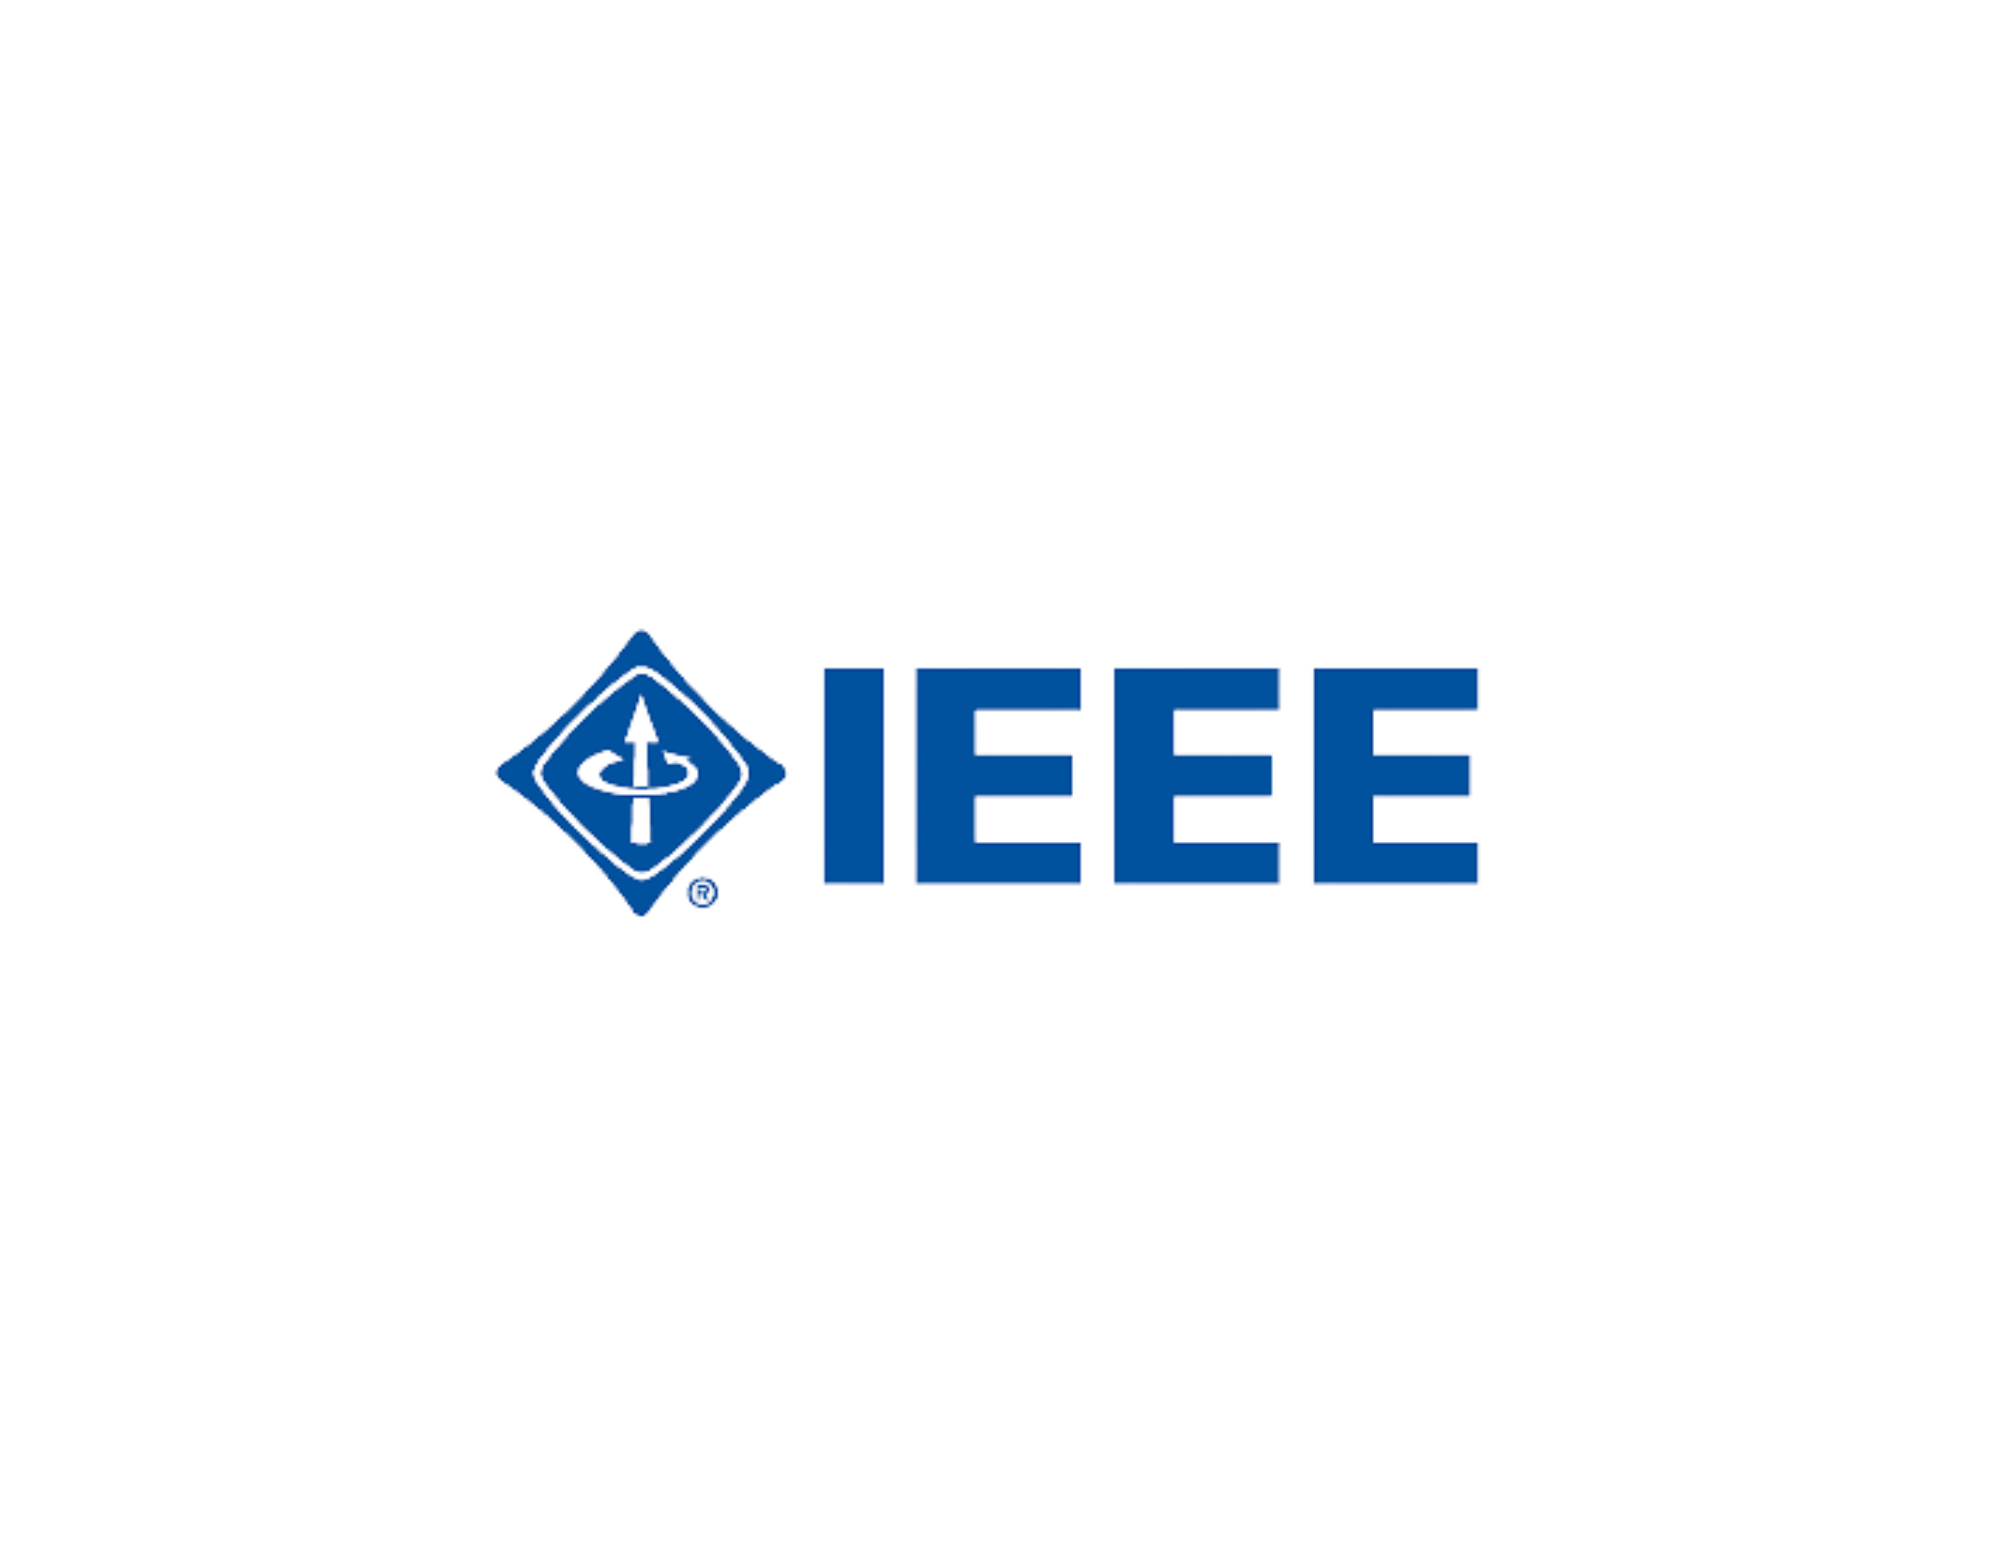 IEEE TRANSPARENT BACKGROUND.png